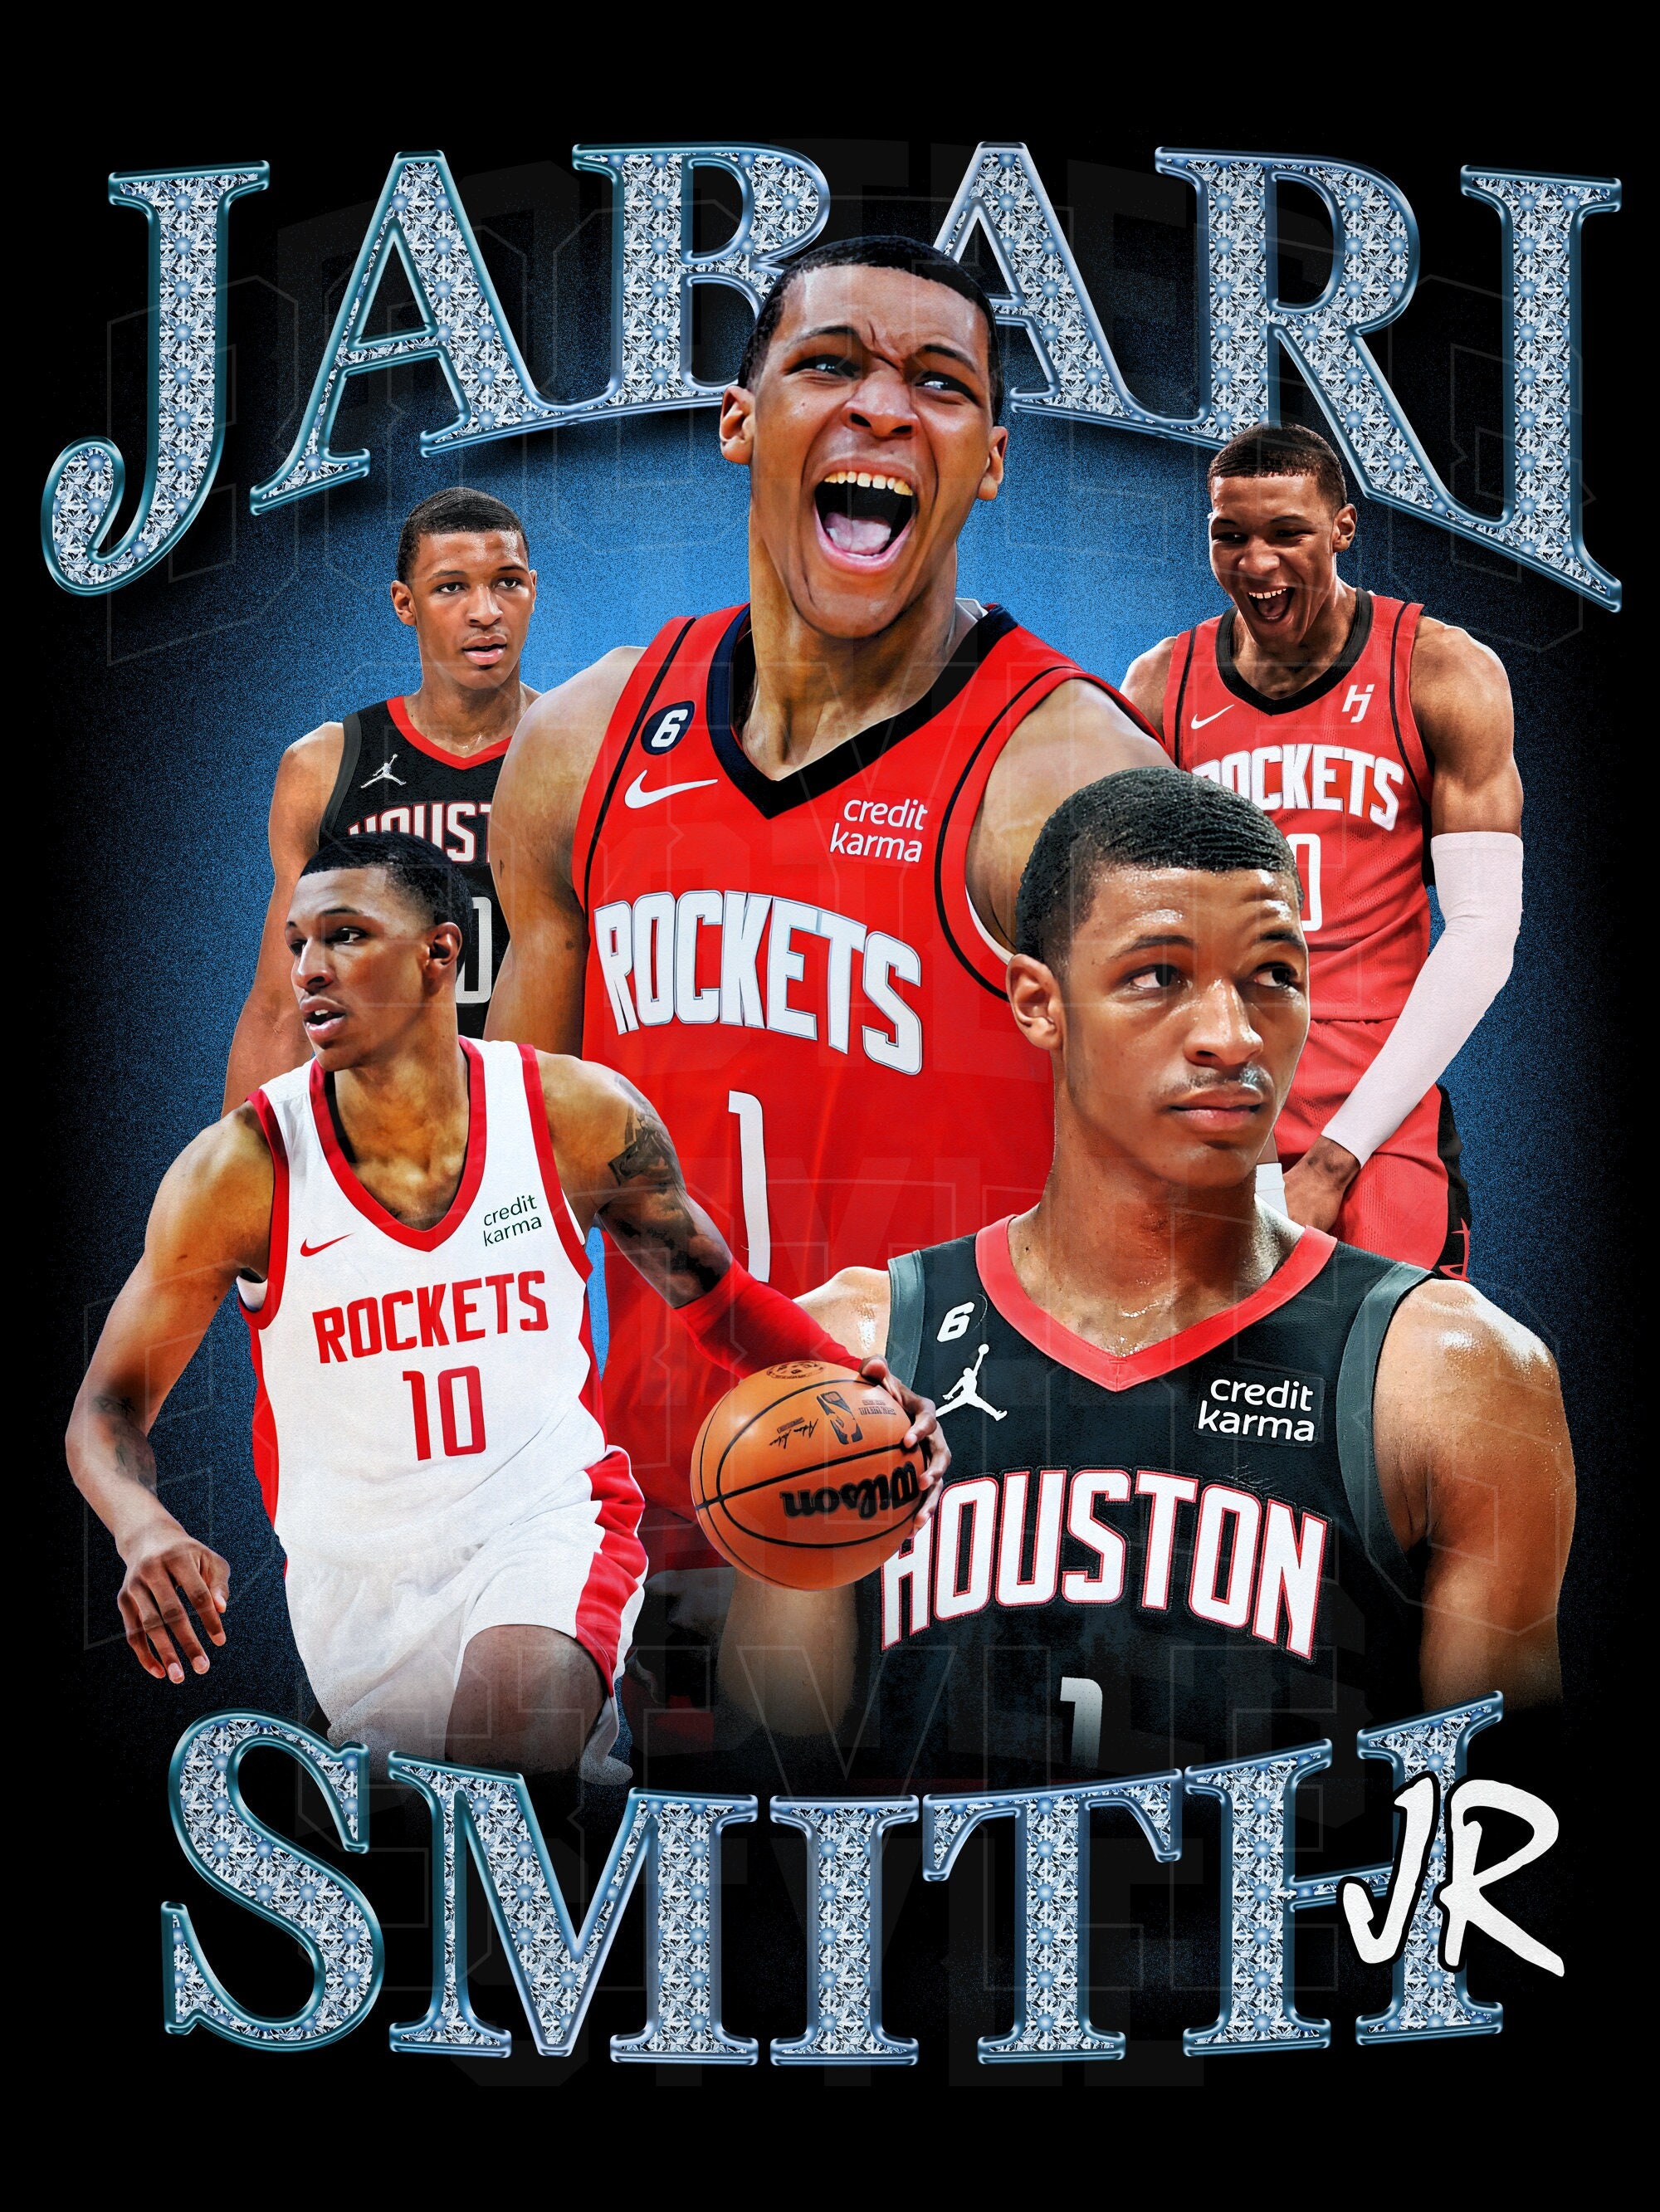 Jabari Smith's strong championship message will please Rockets fans